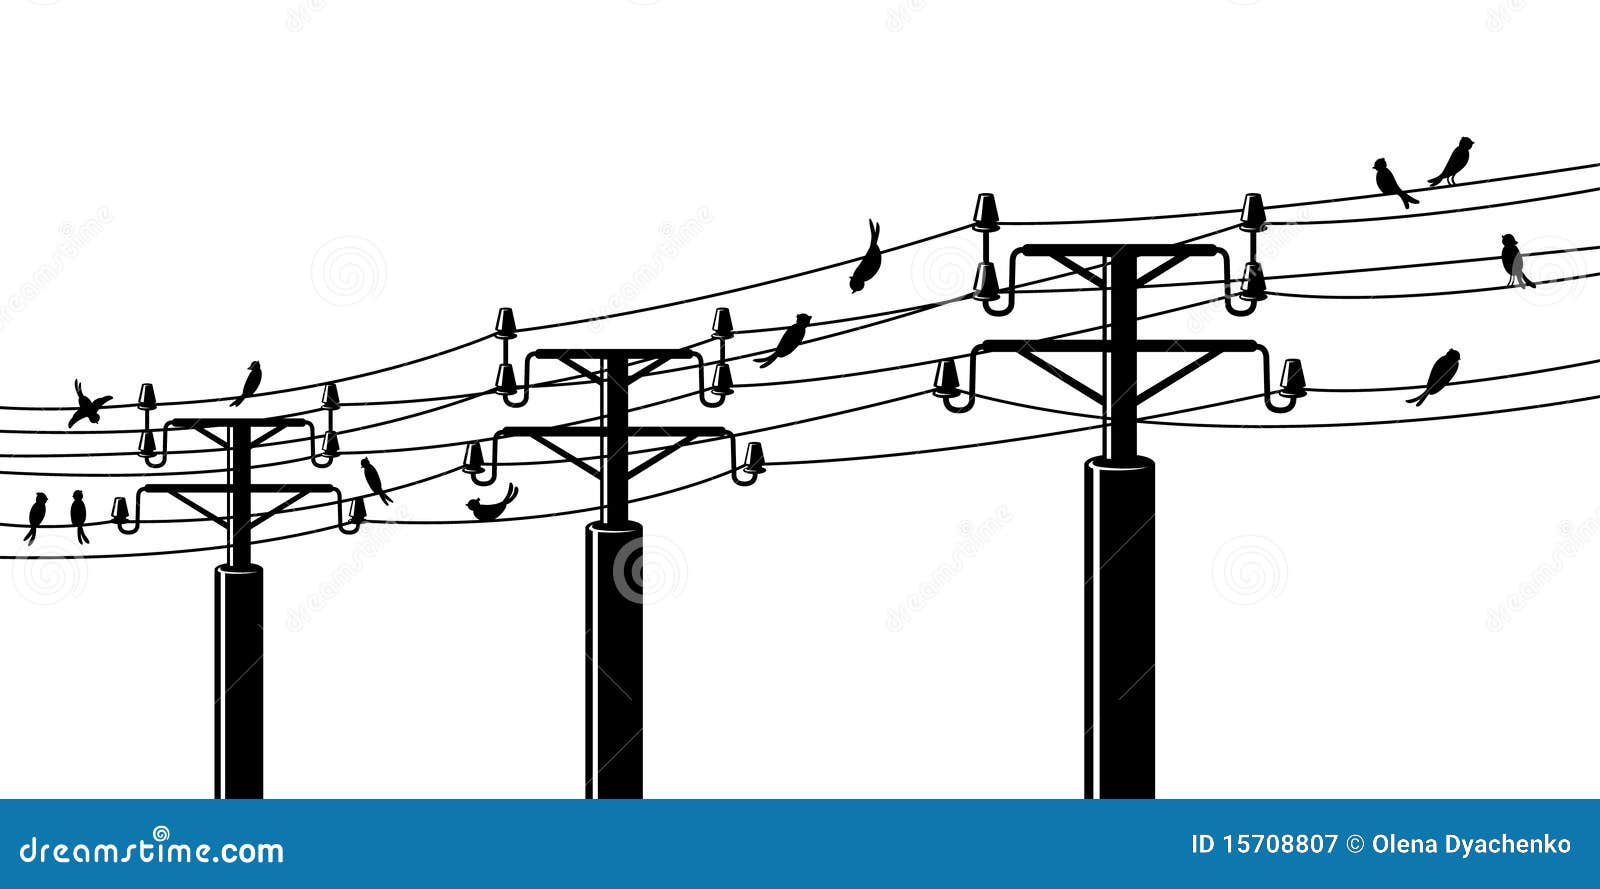 clipart of power lines - photo #28